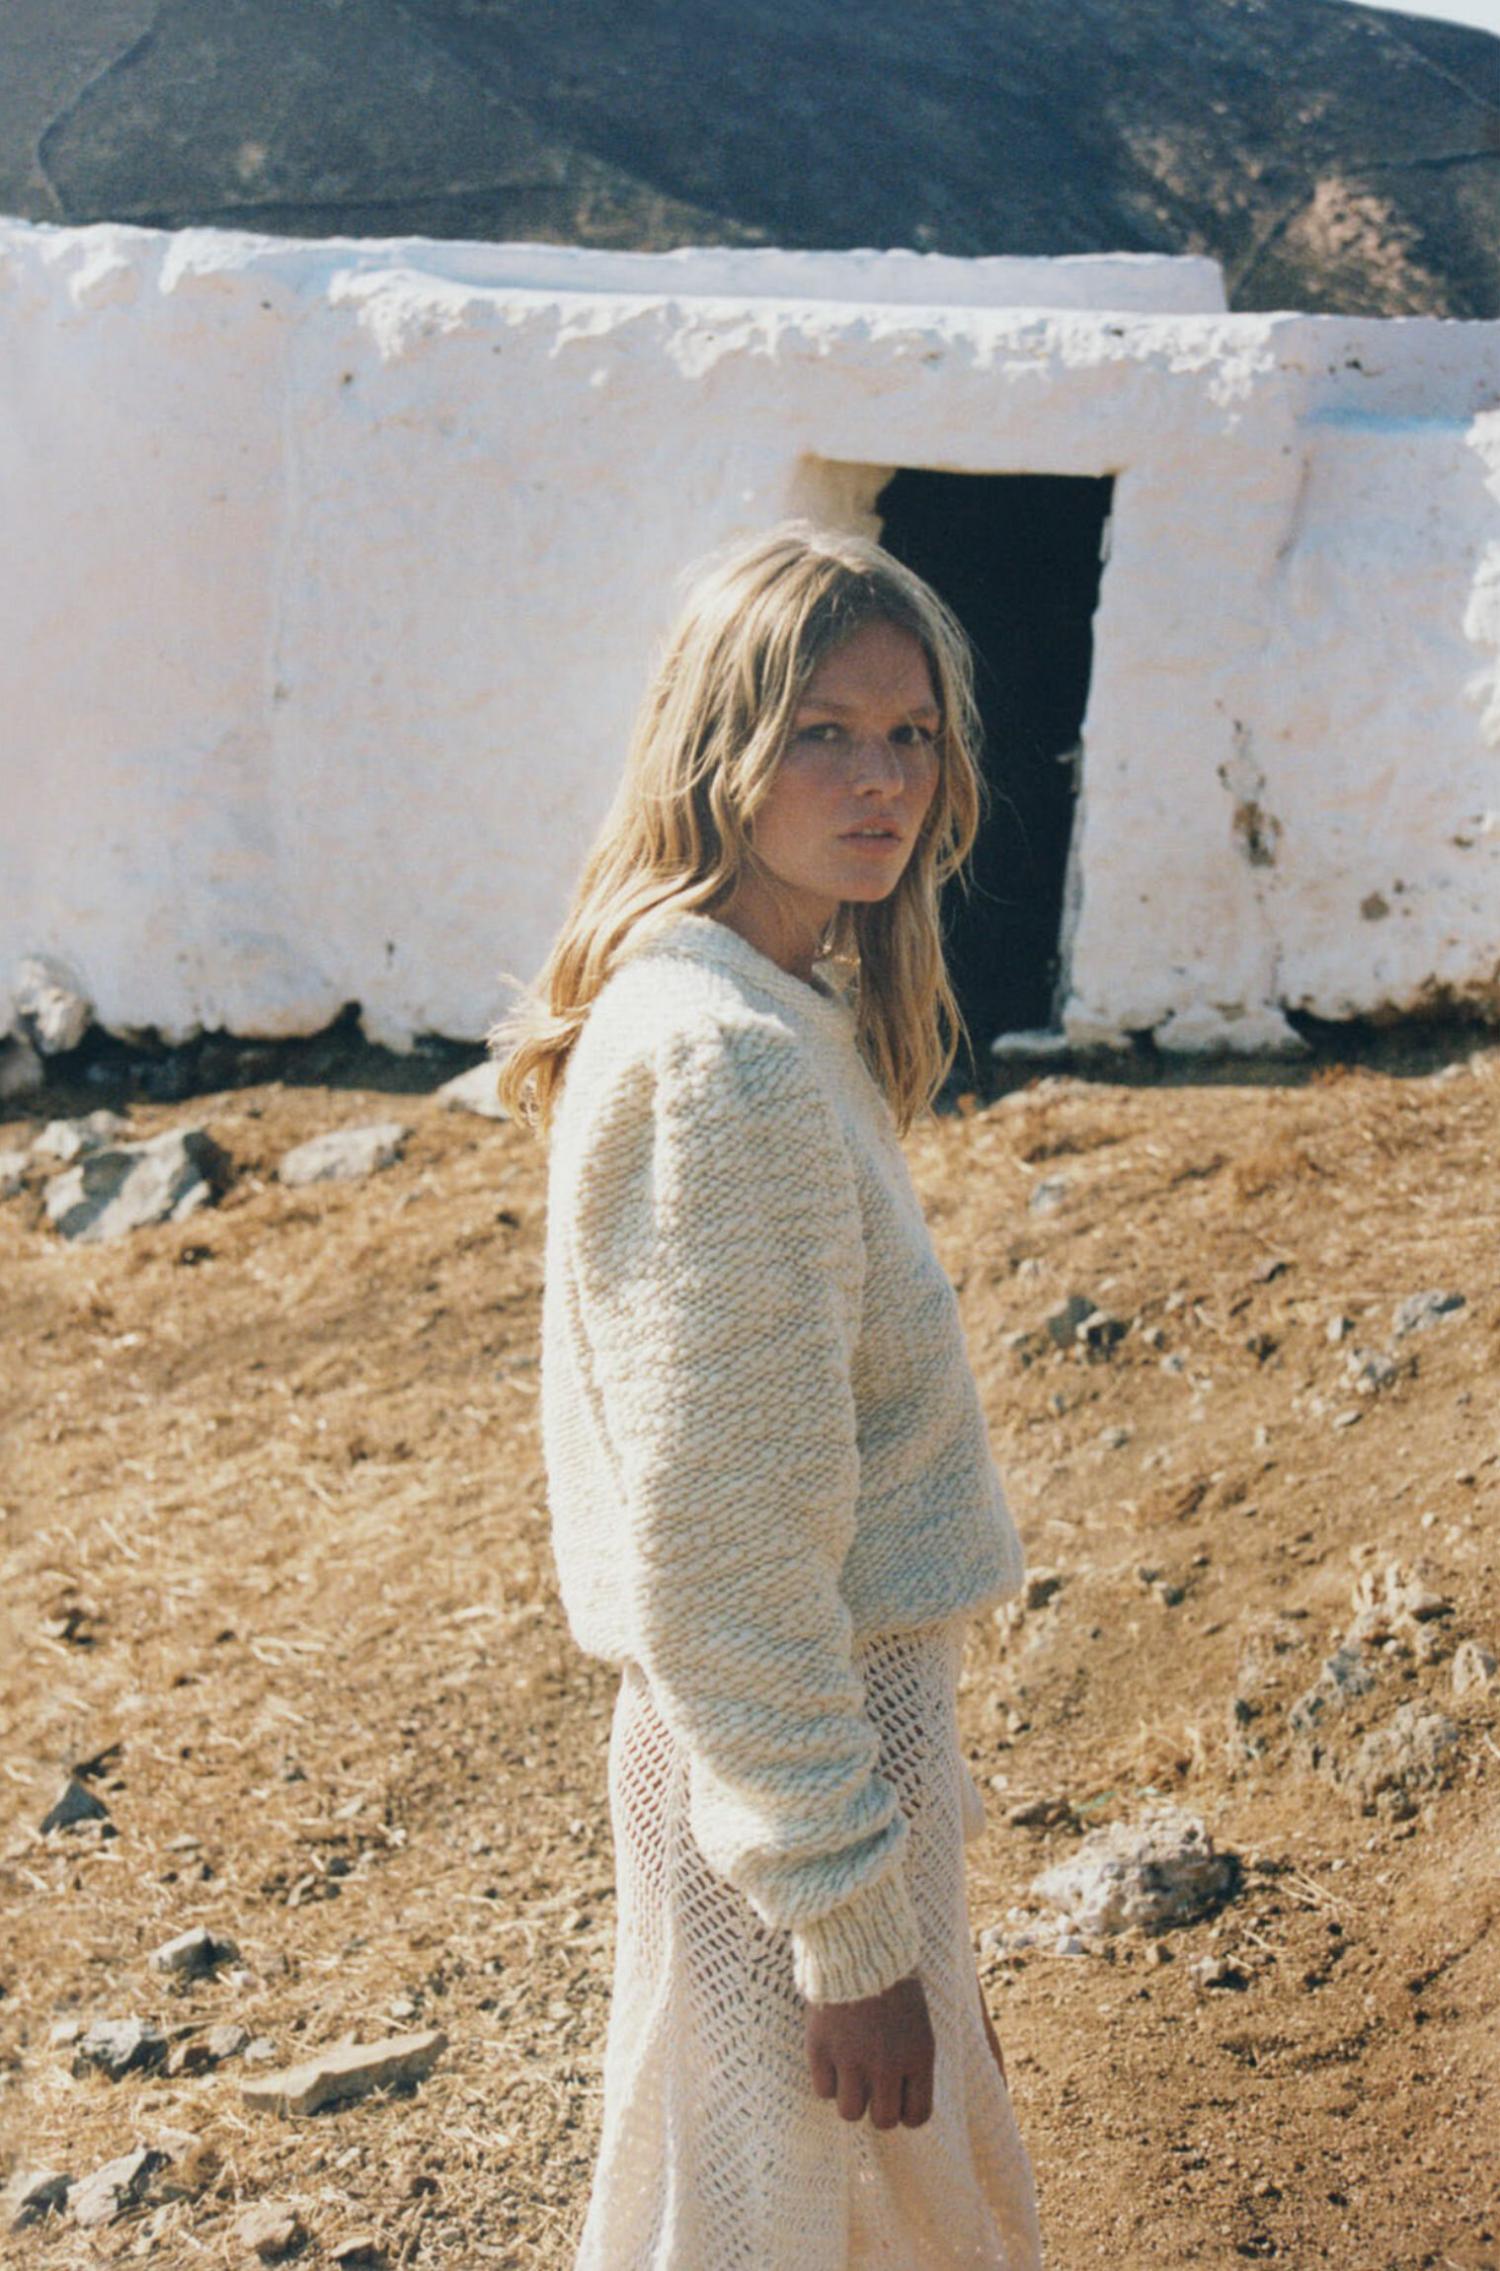 Anna Ewers in Mykonos by Henrik Purienne for Vogue Paris August 2021. Clothing: Sweater by Isabel Marant; Skirt by Akoia Swim; Makeup using Dior Beauty